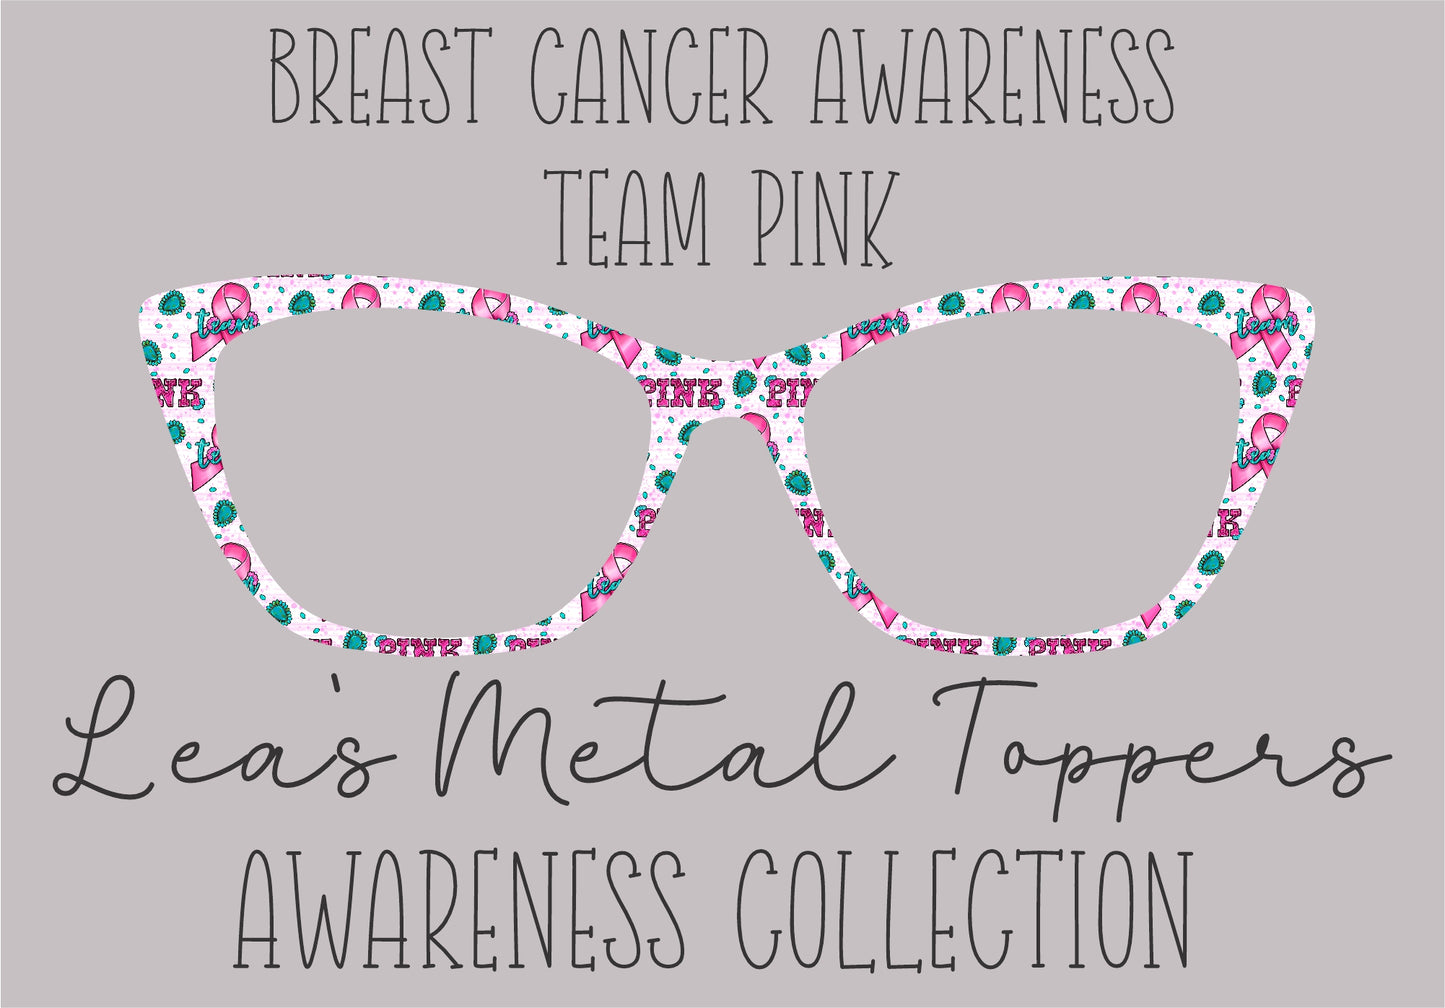 BREAST CANCER AWARENESS TEAM PINK Eyewear Frame Toppers COMES WITH MAGNETS